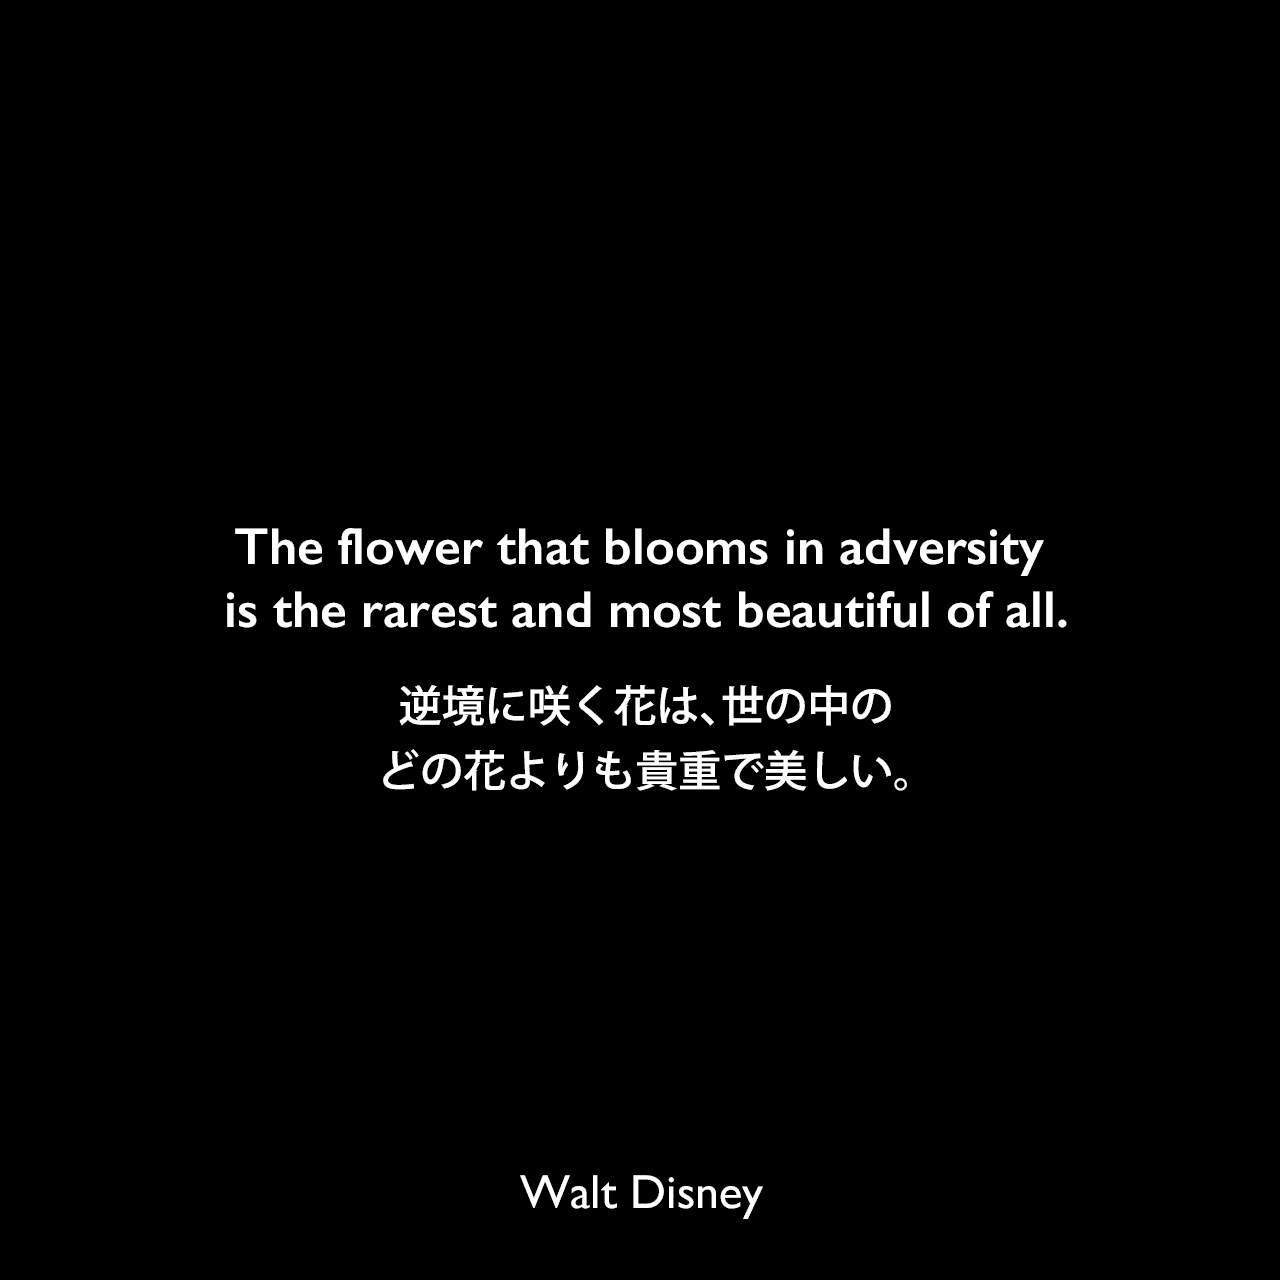 The flower that blooms in adversity is the rarest and most beautiful of all.逆境に咲く花は、世の中のどの花よりも貴重で美しい。Walt Disney